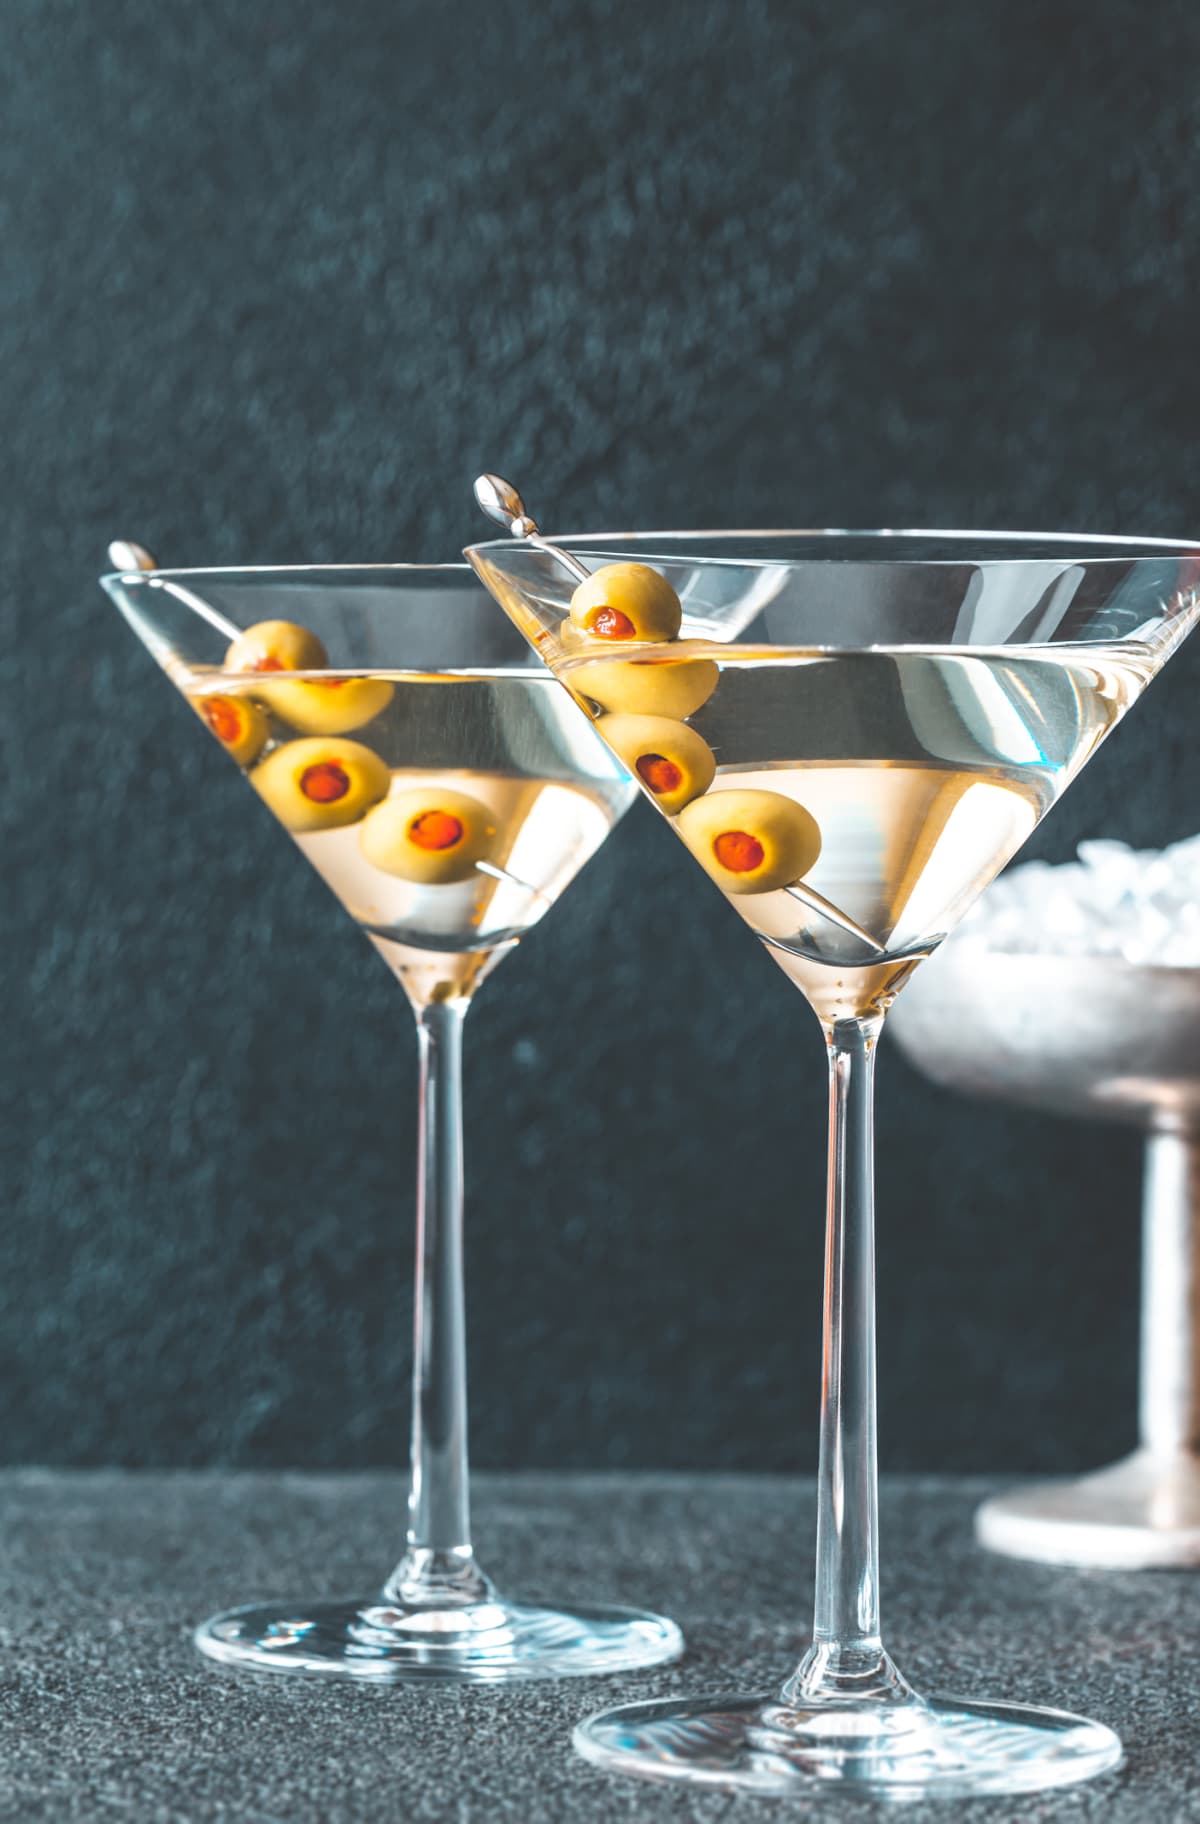 Two glasses of martini cocktail garnished with green olives